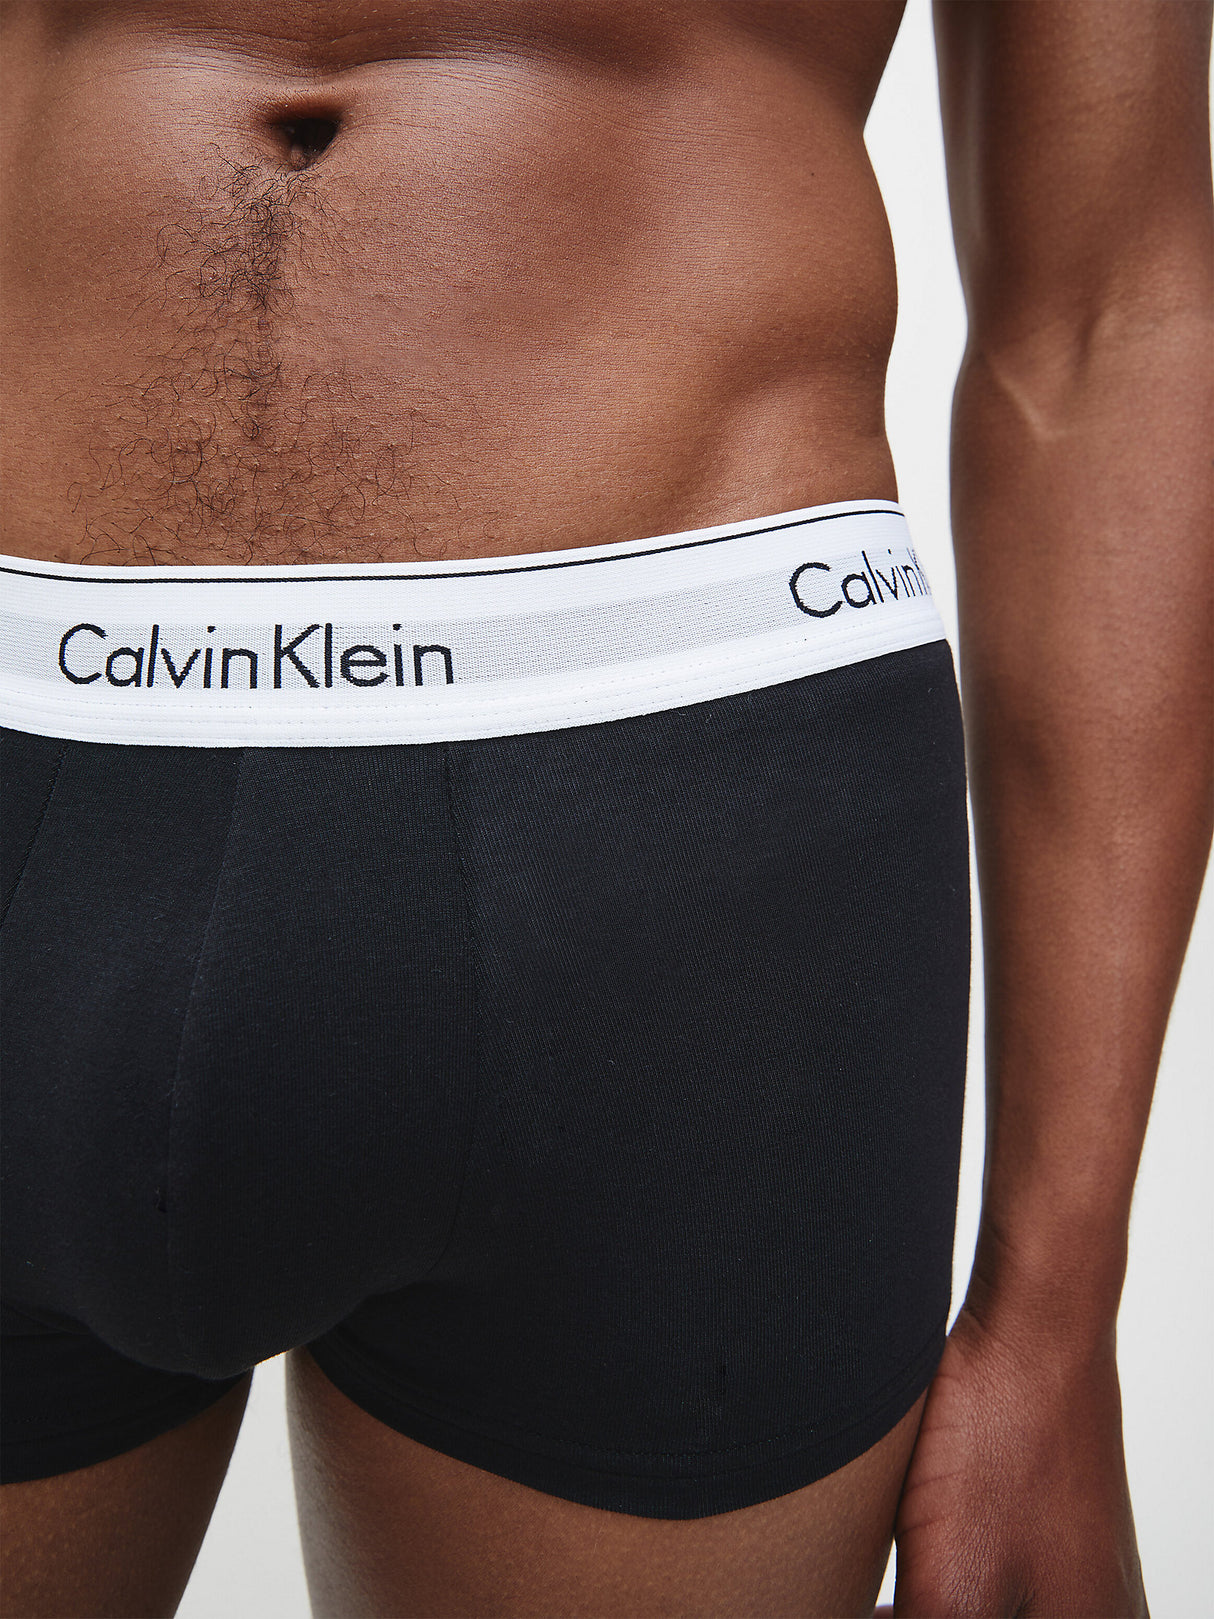 Calvin Klein Men's 3 Pack Cotton Stretch Low Rise Trunks in Black/White/Grey